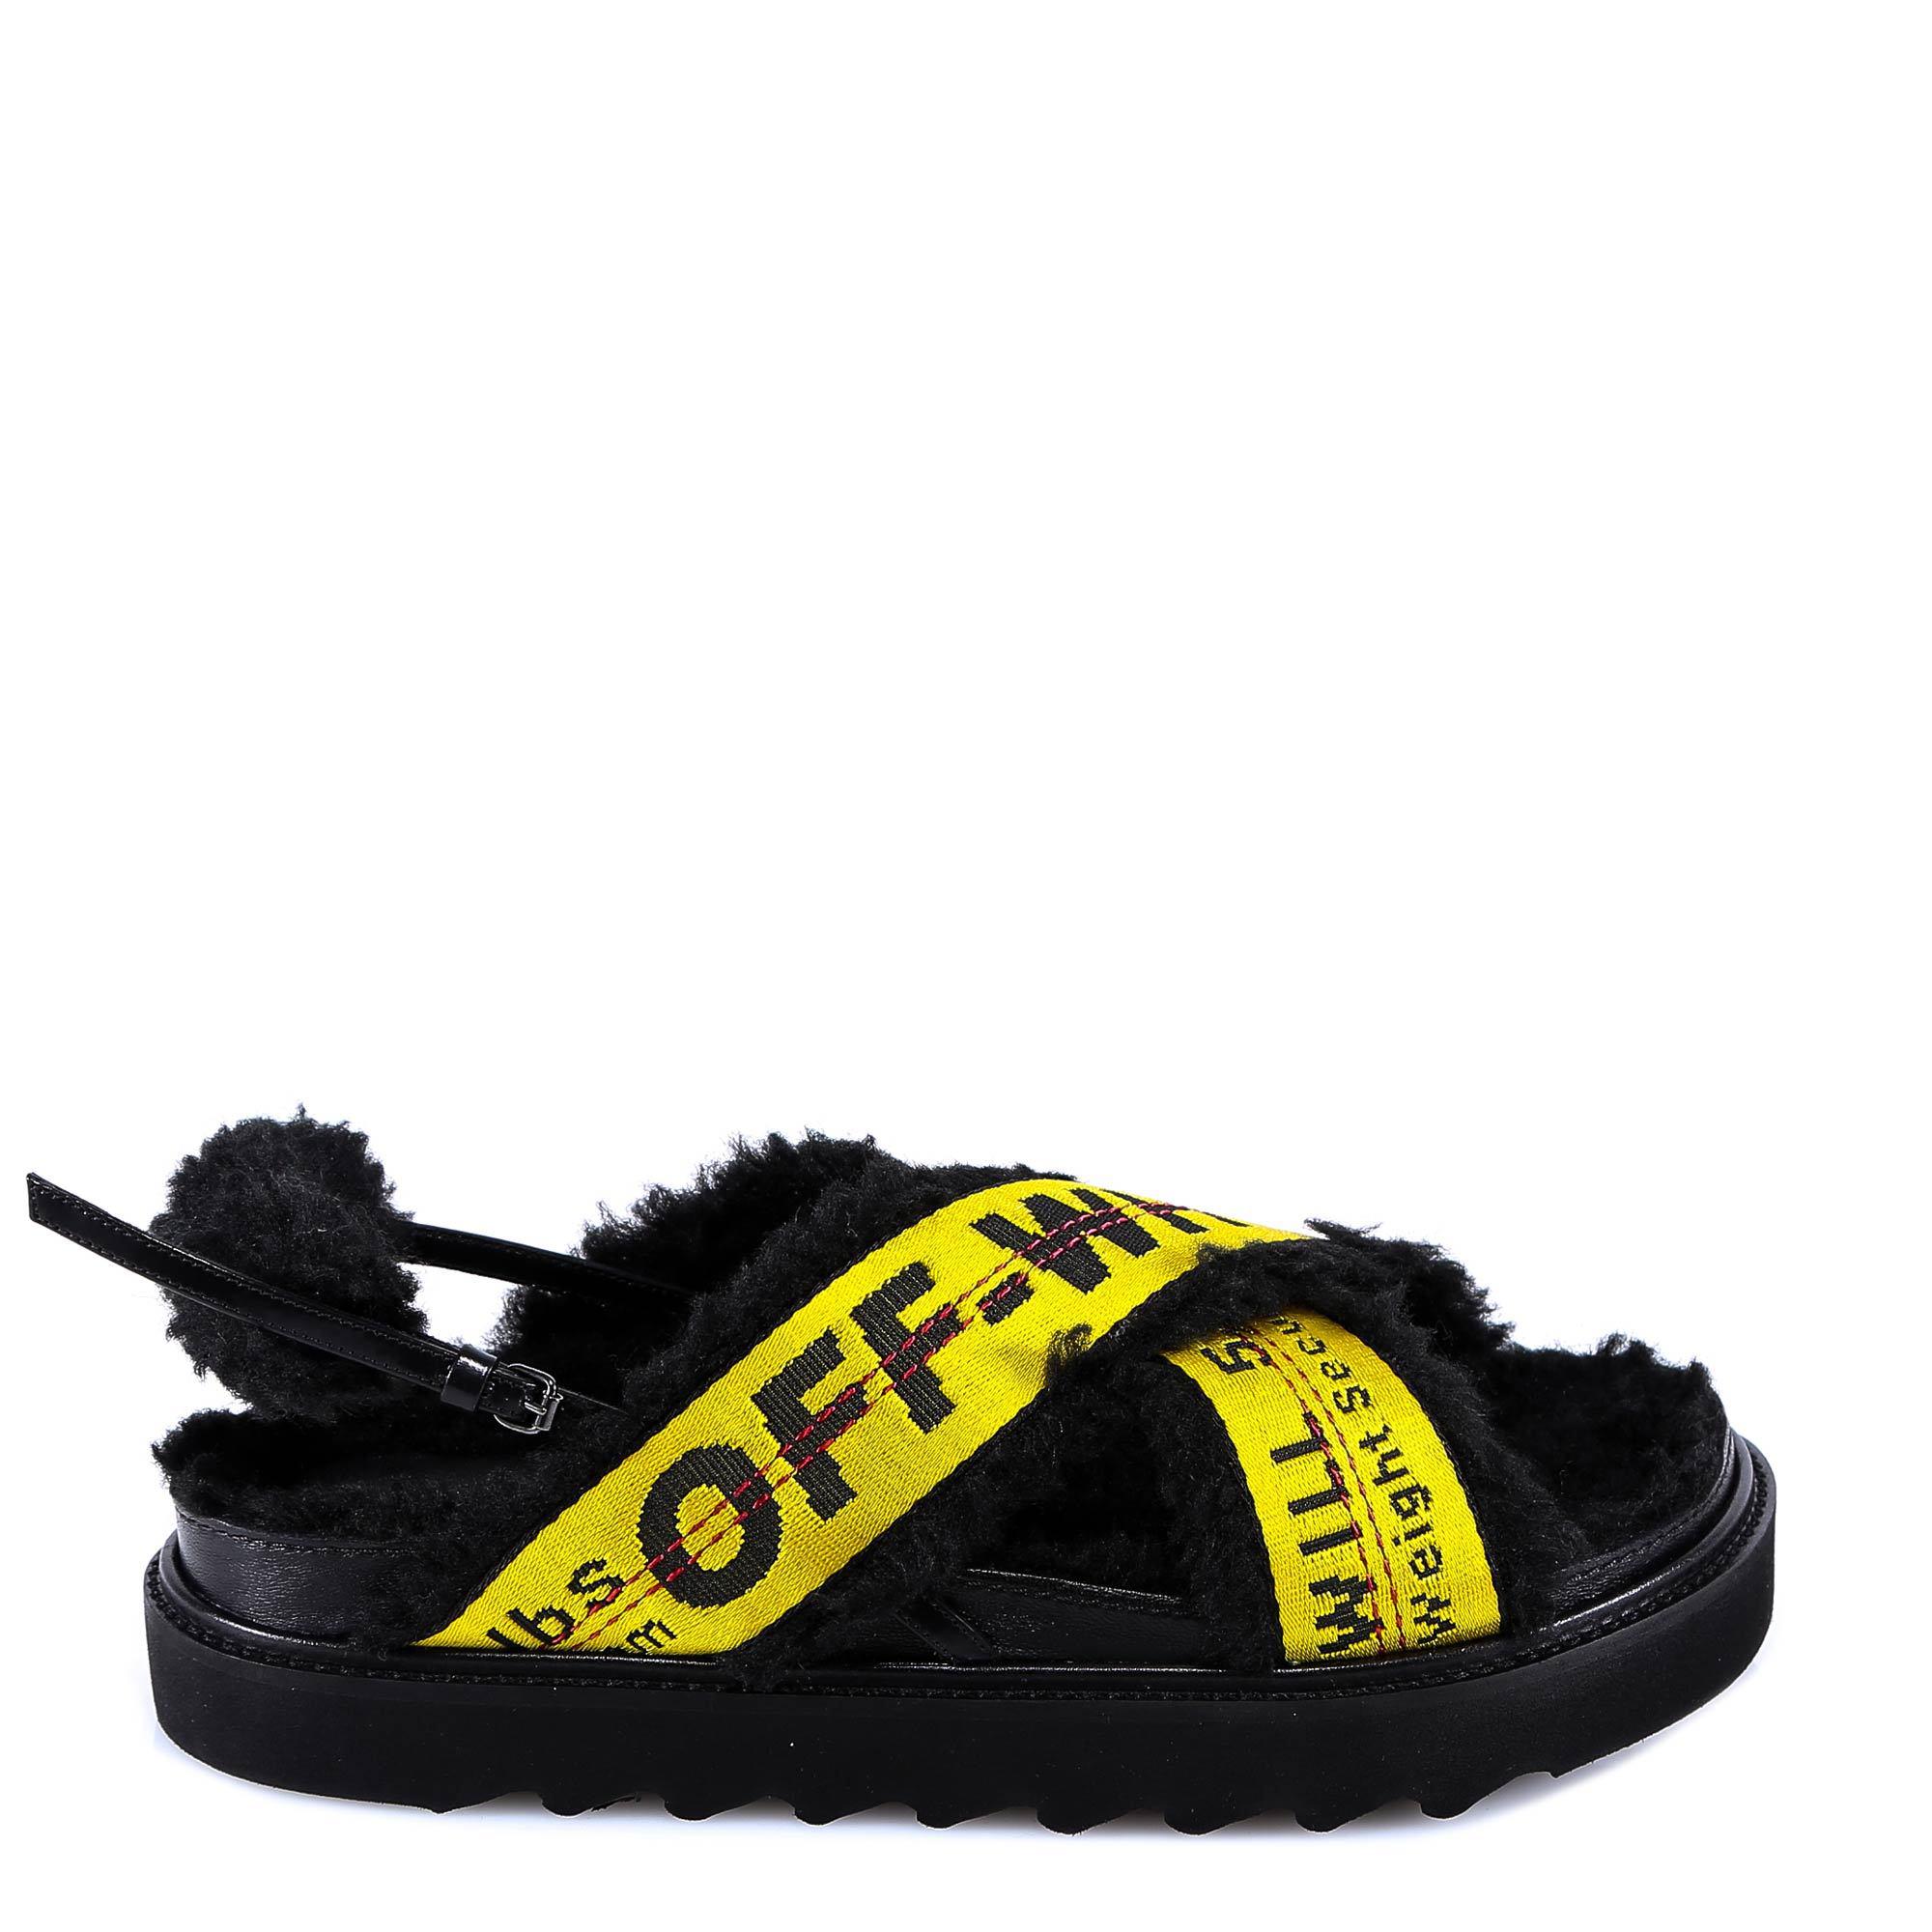 Off-White c/o Virgil Abloh Industrial Criss Cross Sandals in Yellow | Lyst